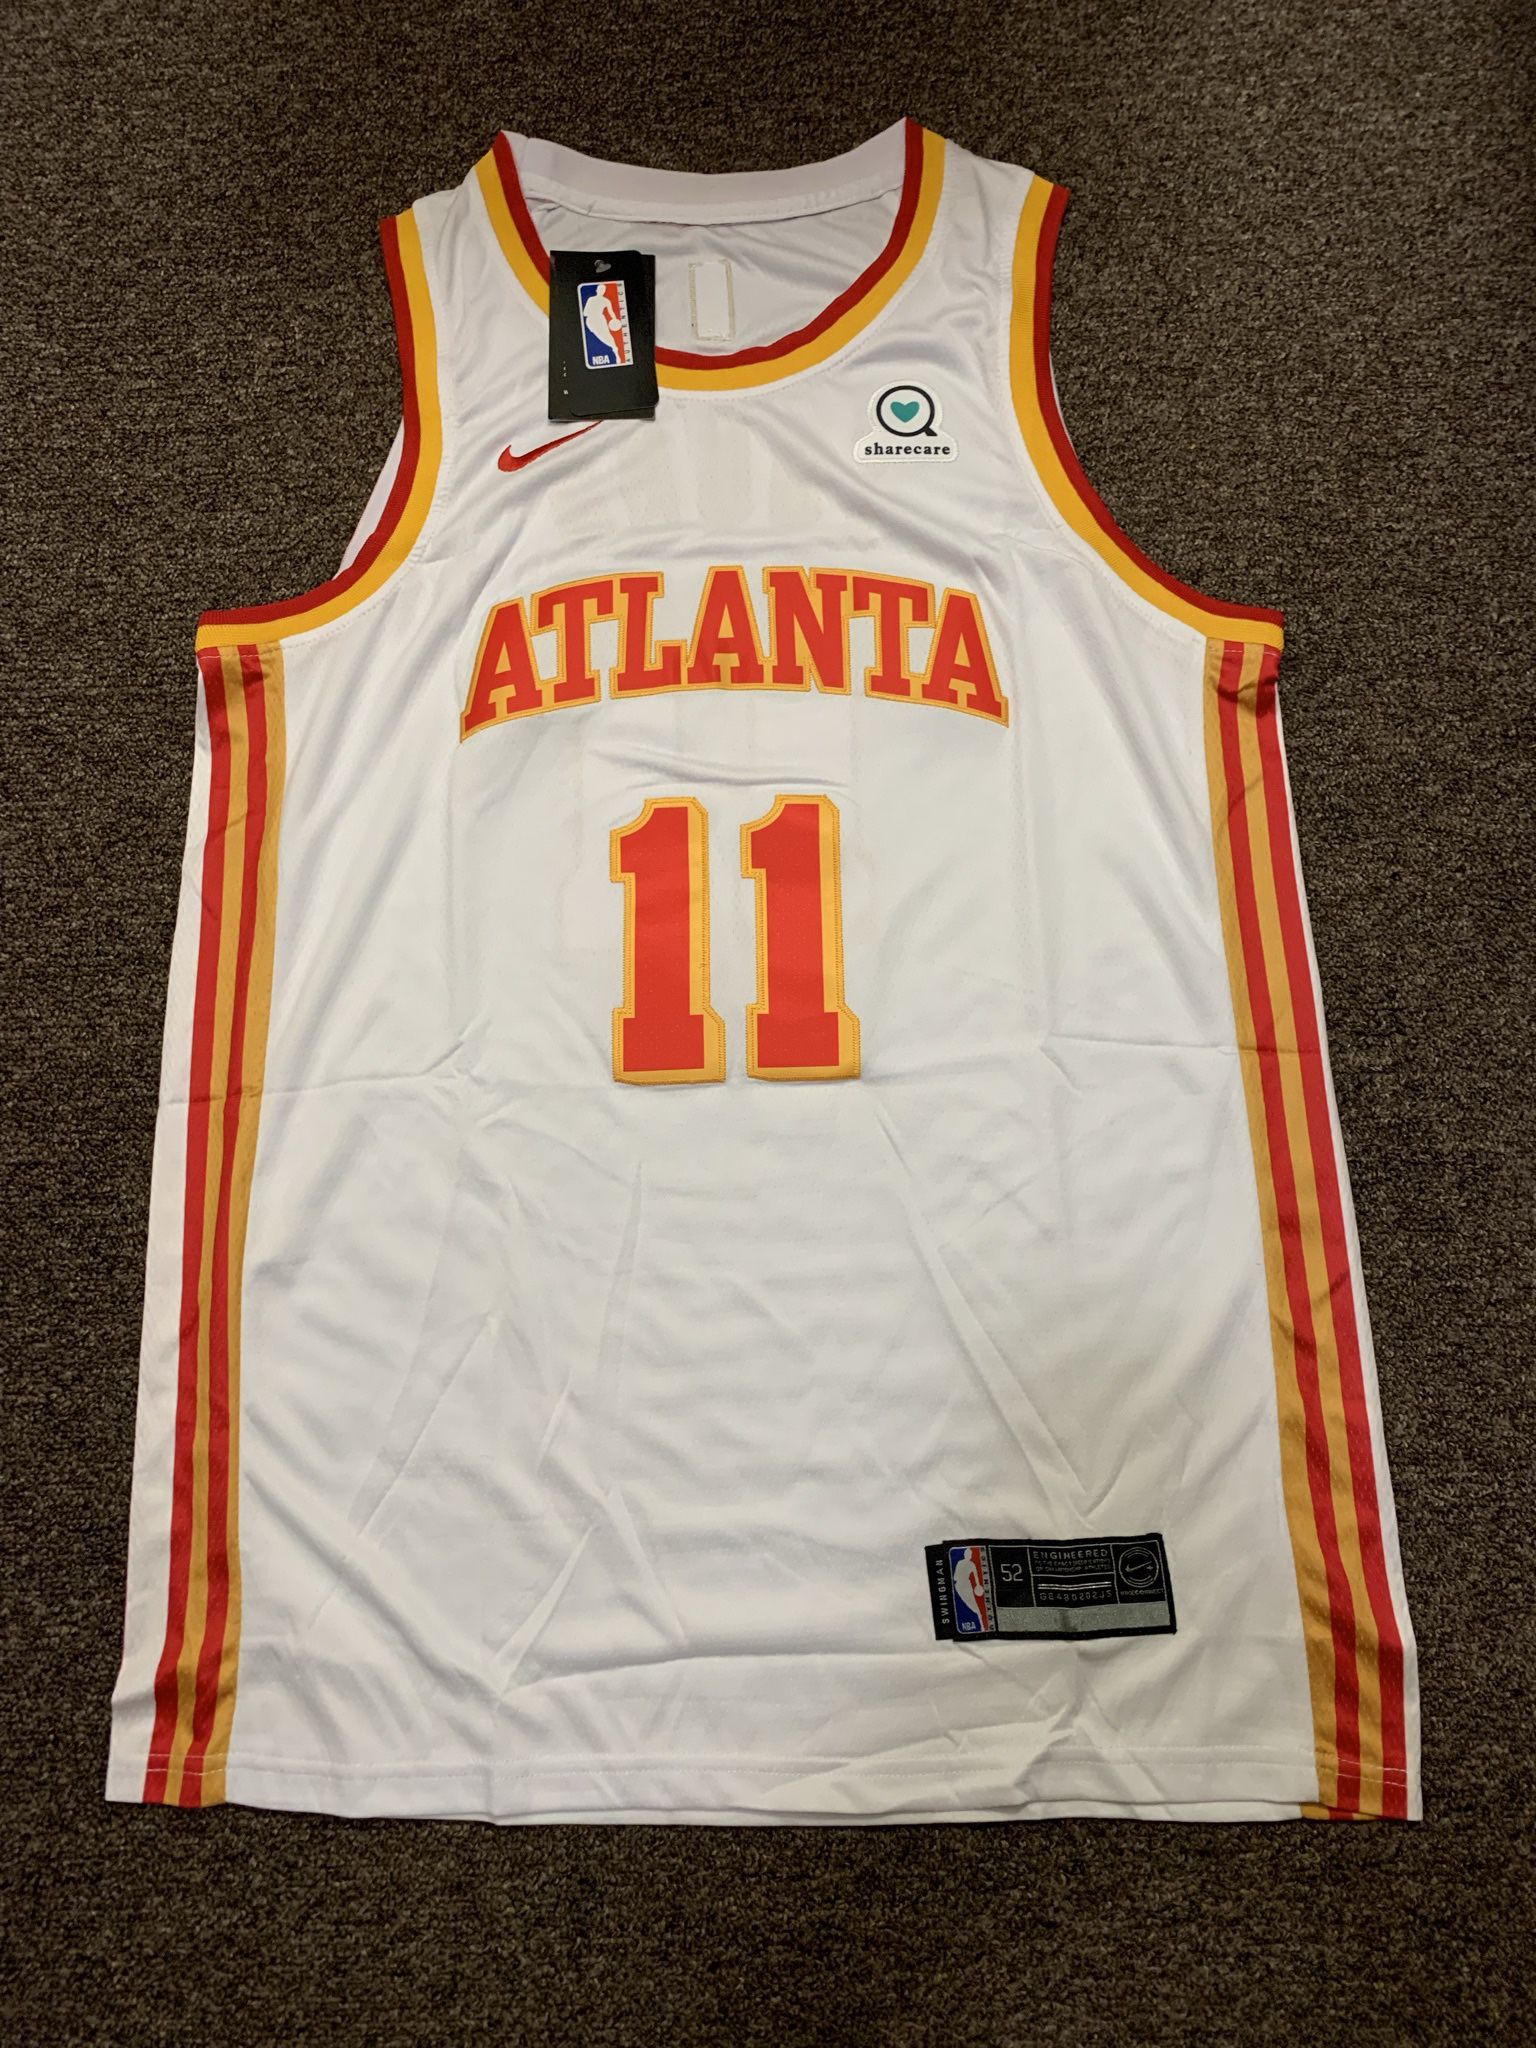 Trae Young jersey for Sale in Atlanta, GA - OfferUp